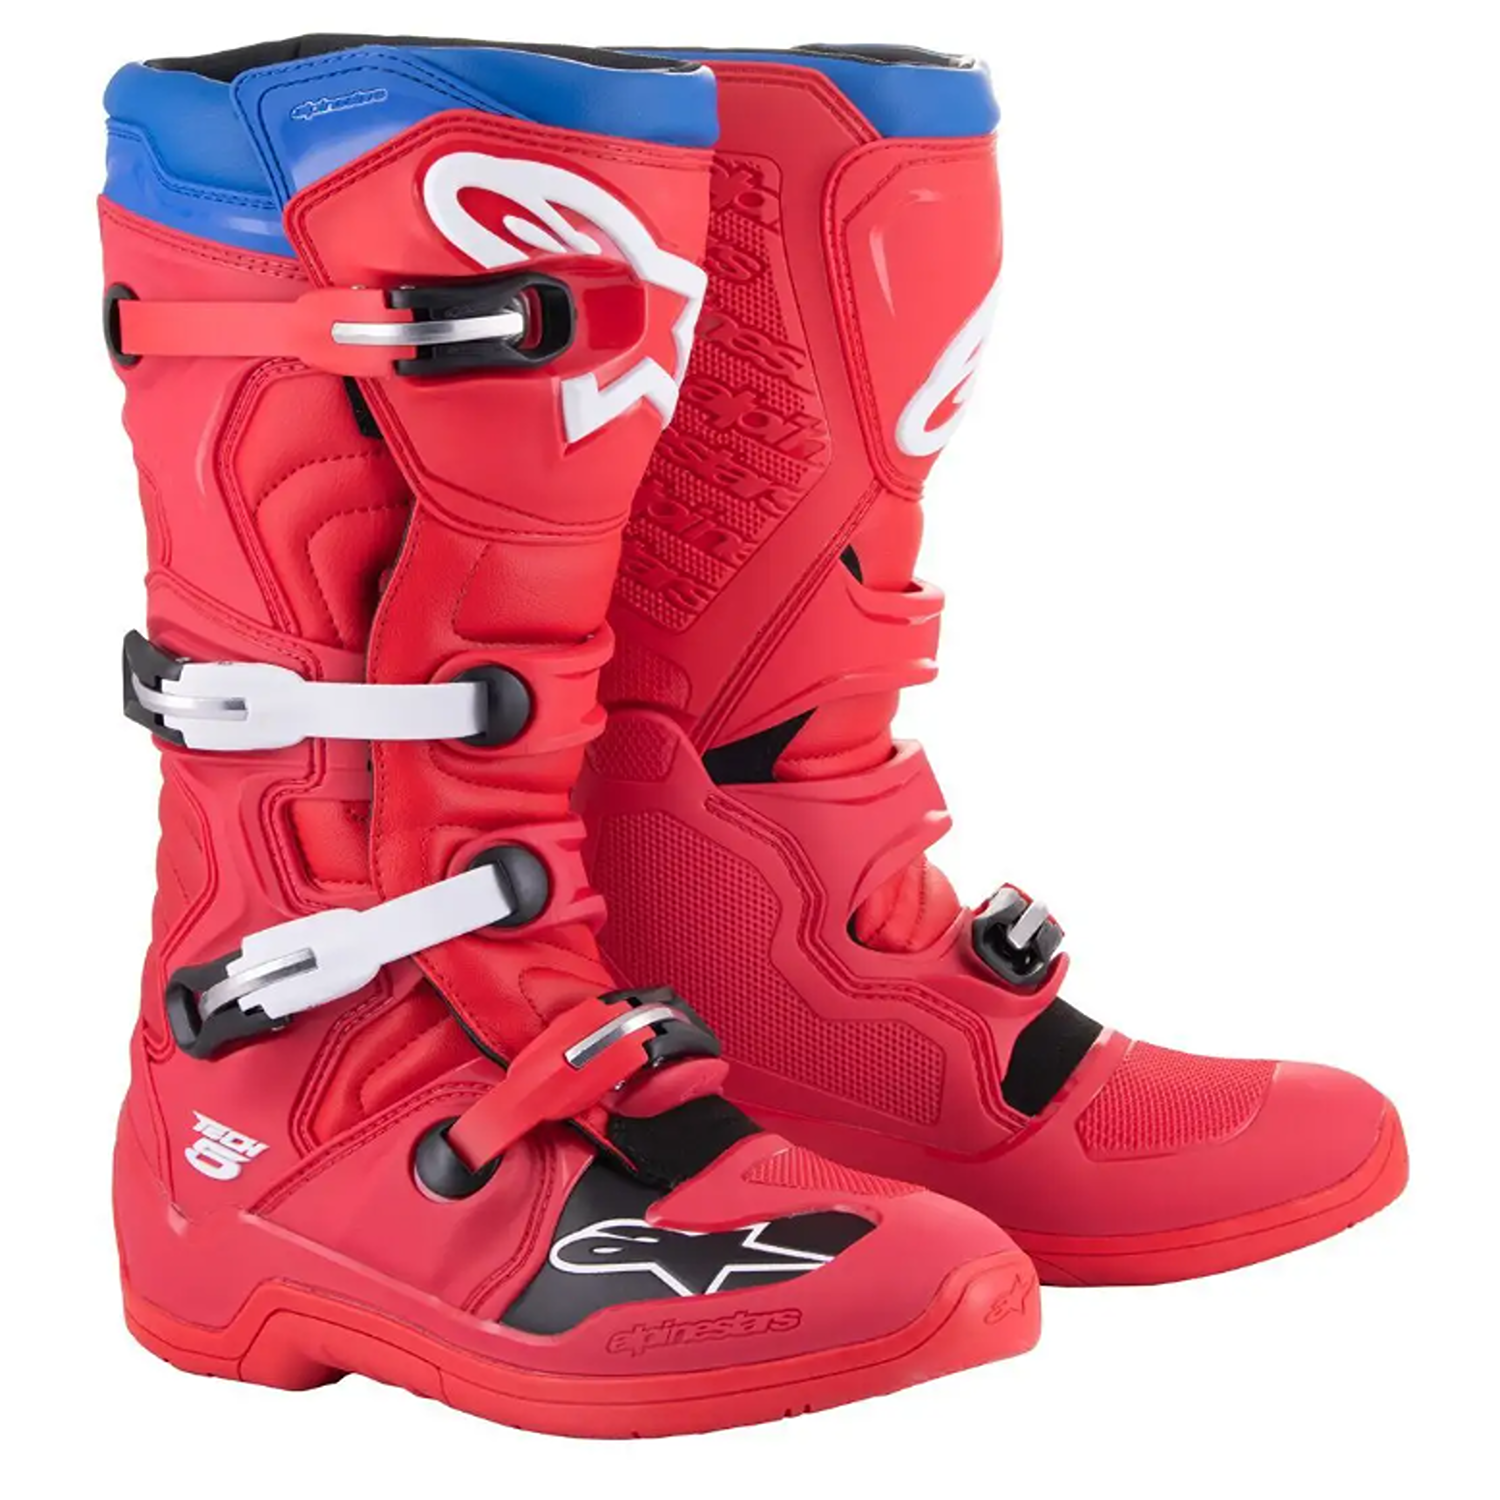 Image of Alpinestars Tech 5 Boots Bright Red Dark Red Blue Taille US 12